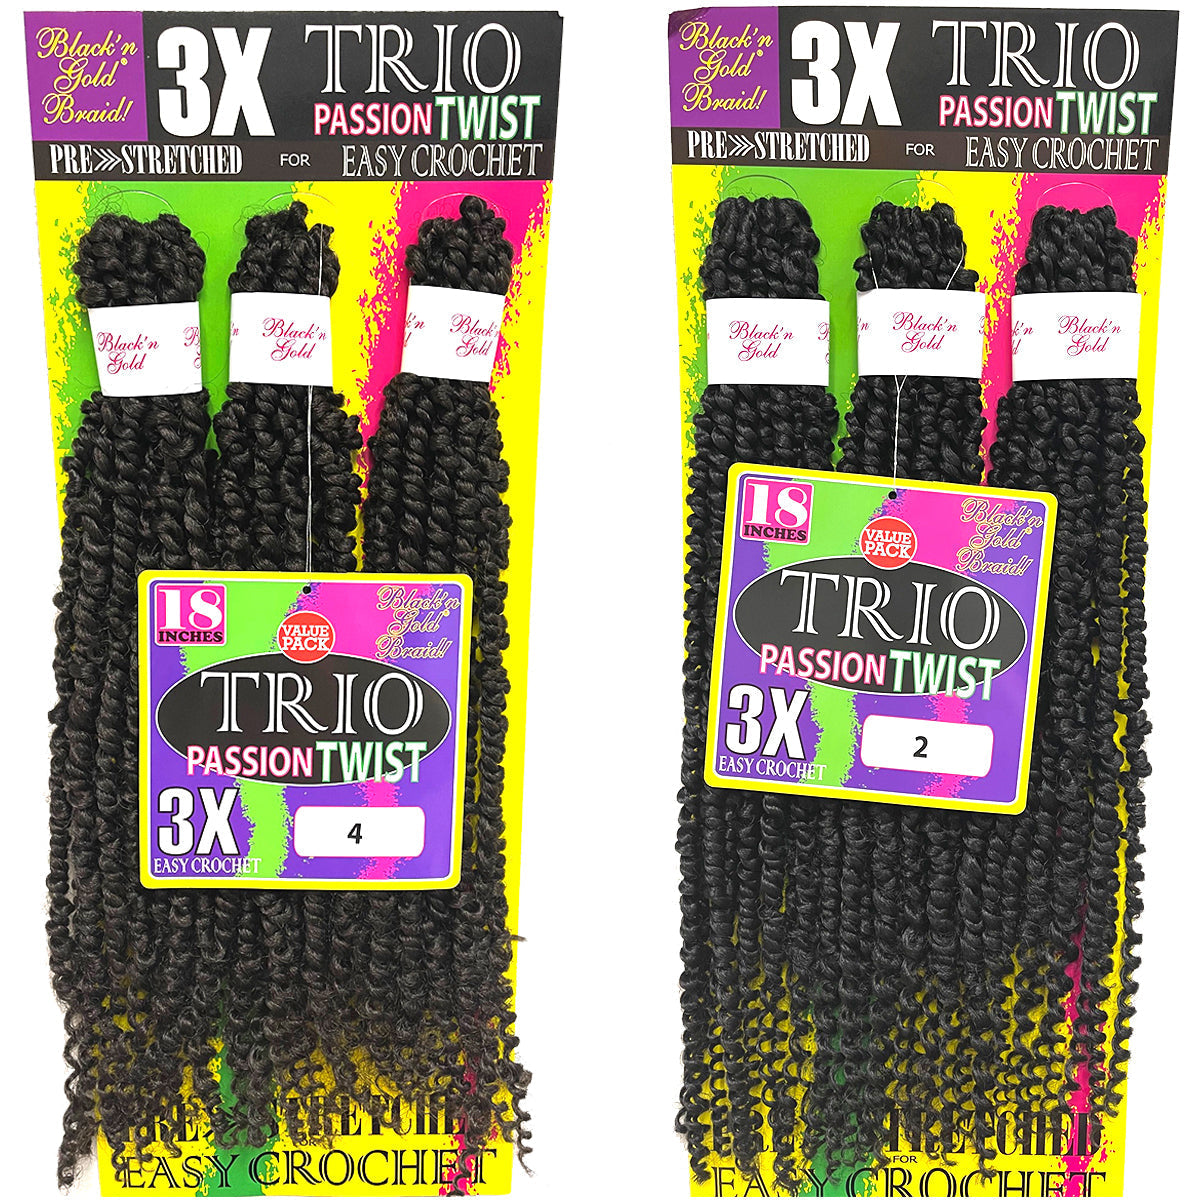 5 Pack Value Deal - BNG 3X TRIO Passion Twist 18" for Crochet Braiding